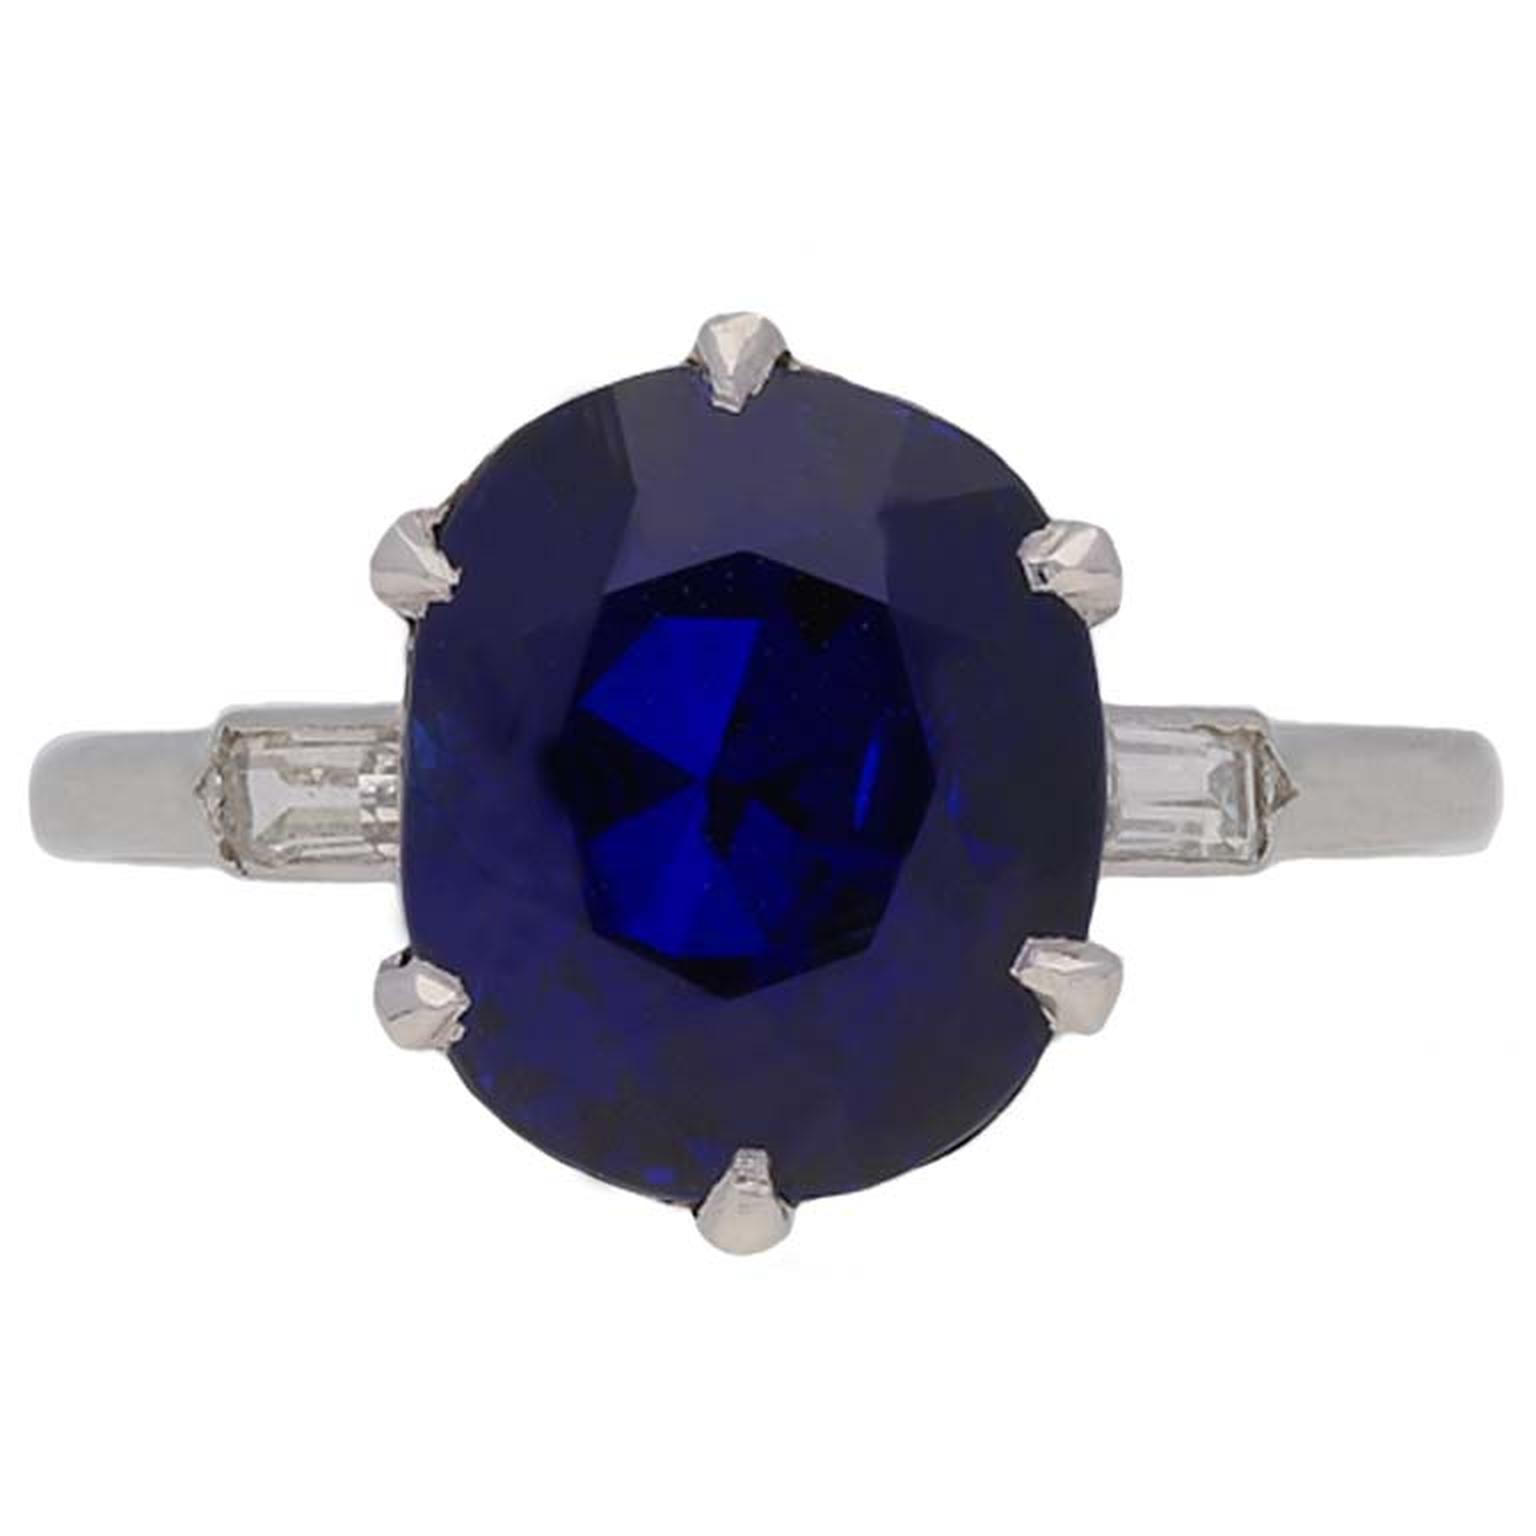 Boucheron sapphire and diamond engagement ring front view